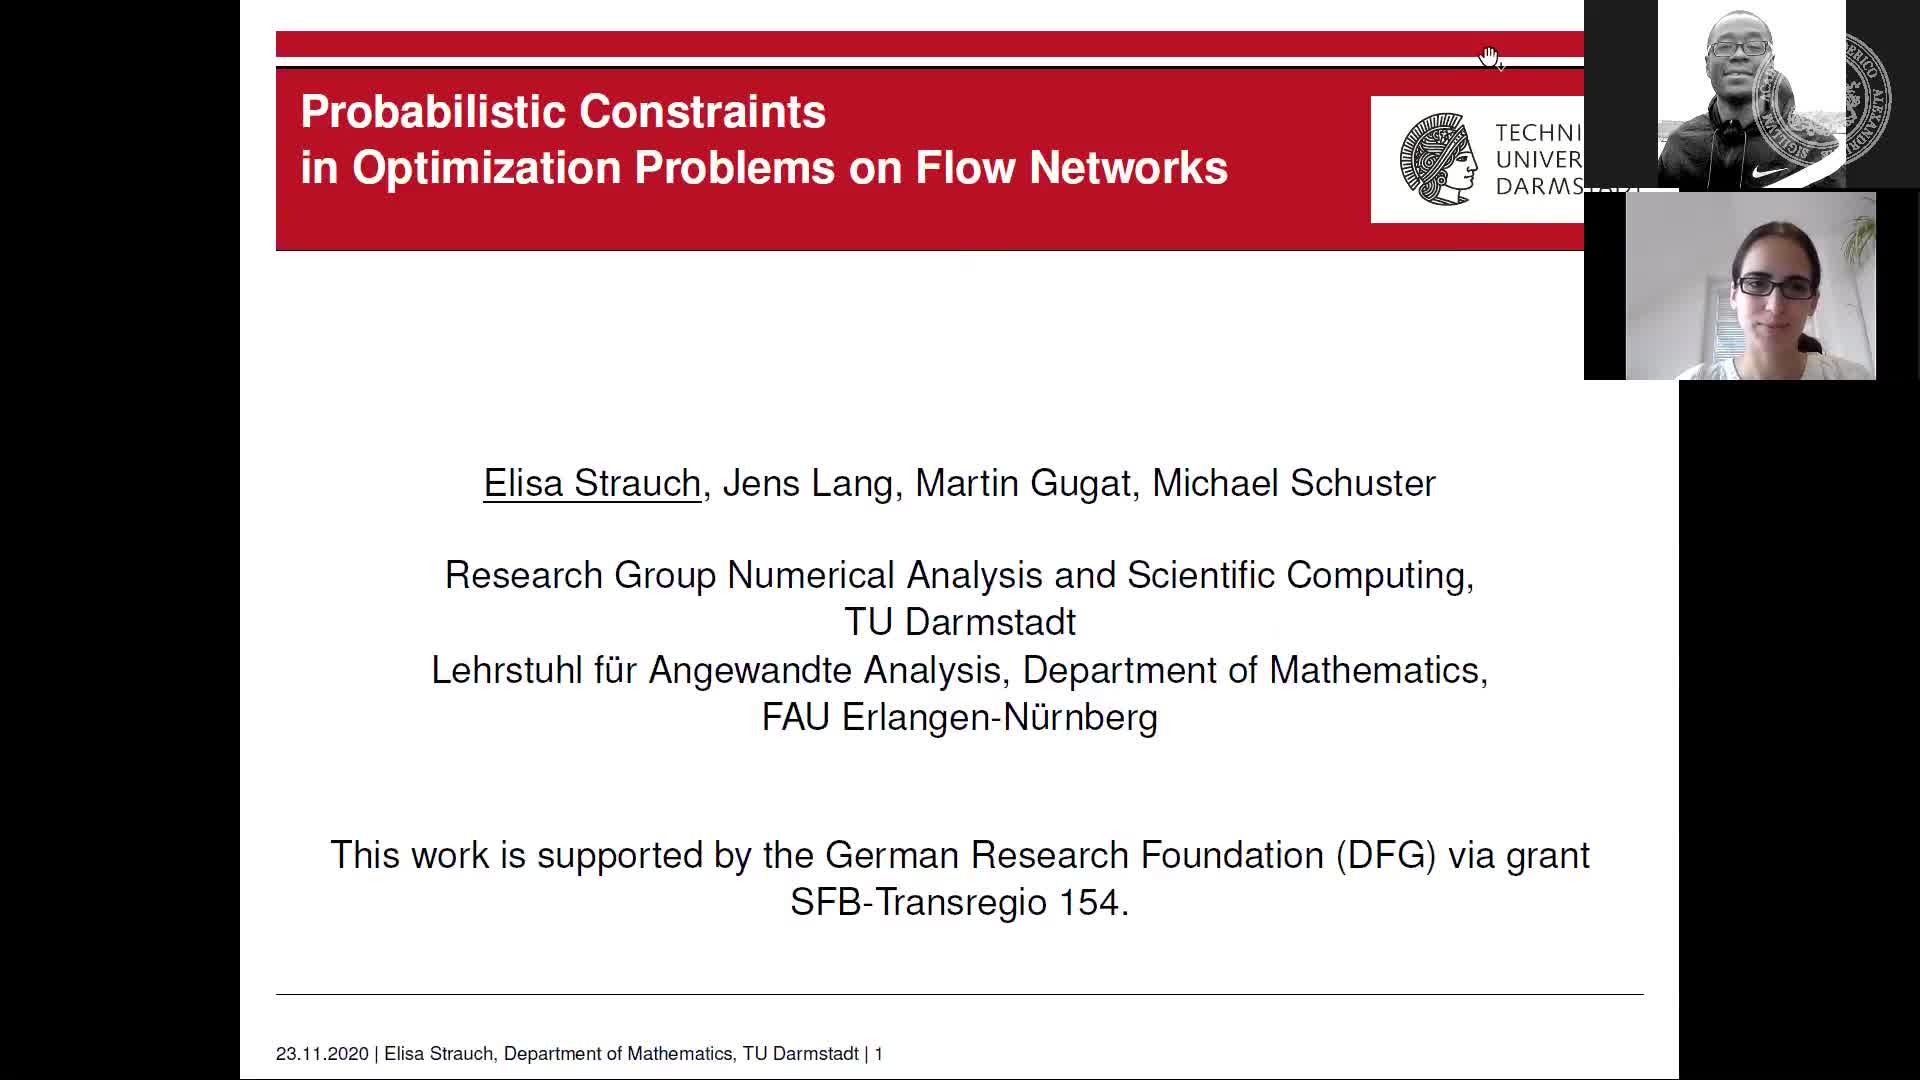 Probabilistic Constraints in Optimization Problems on Flow Networks (Elisa Strauch, TU Damstadt) preview image